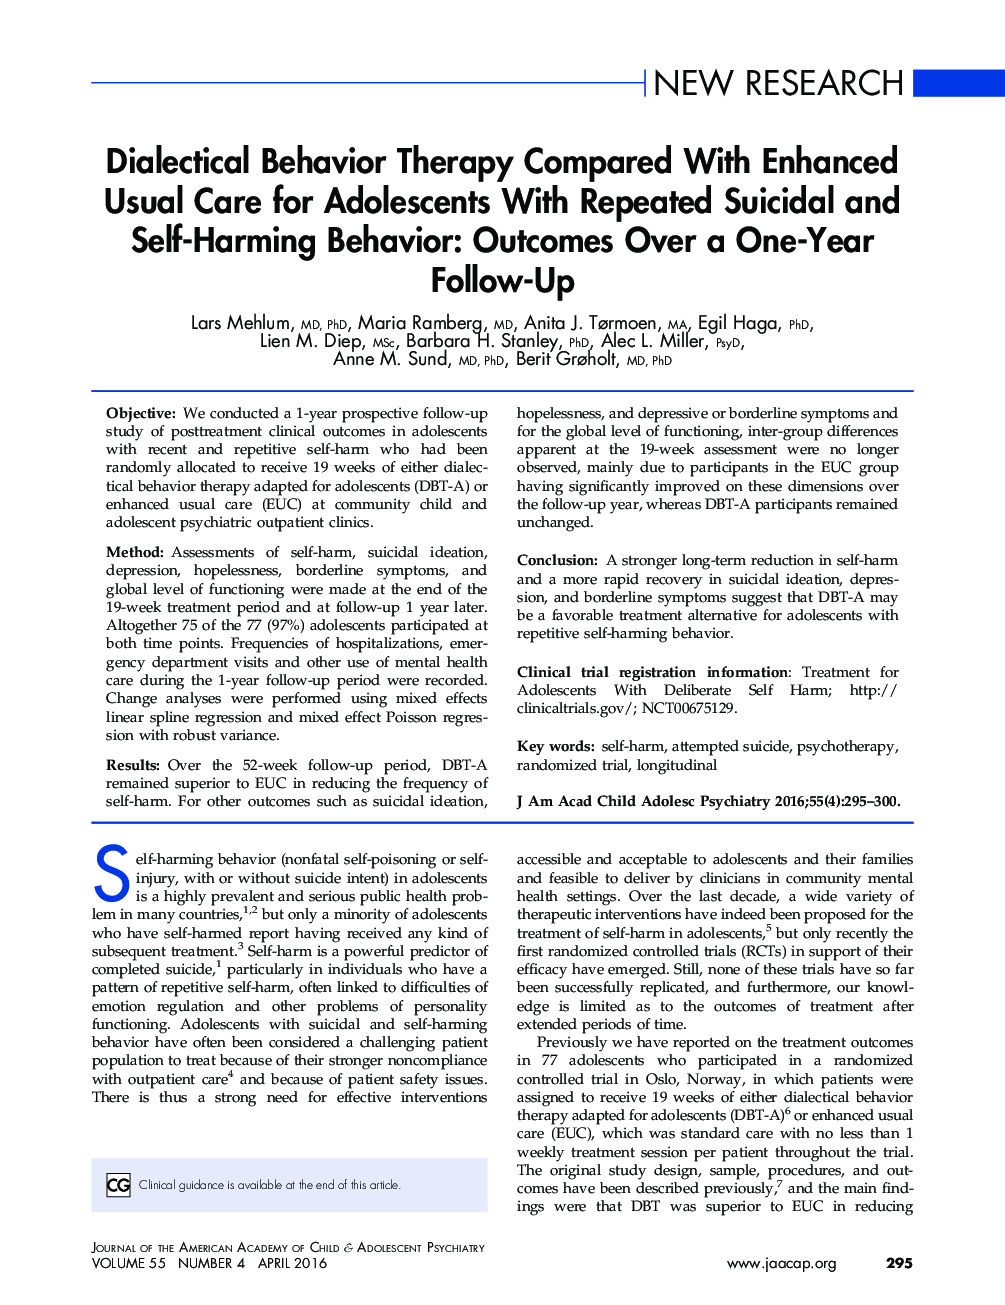 Dialectical Behavior Therapy Compared With Enhanced Usual Care for Adolescents With Repeated Suicidal and Self-Harming Behavior: Outcomes Over a One-Year Follow-Up 